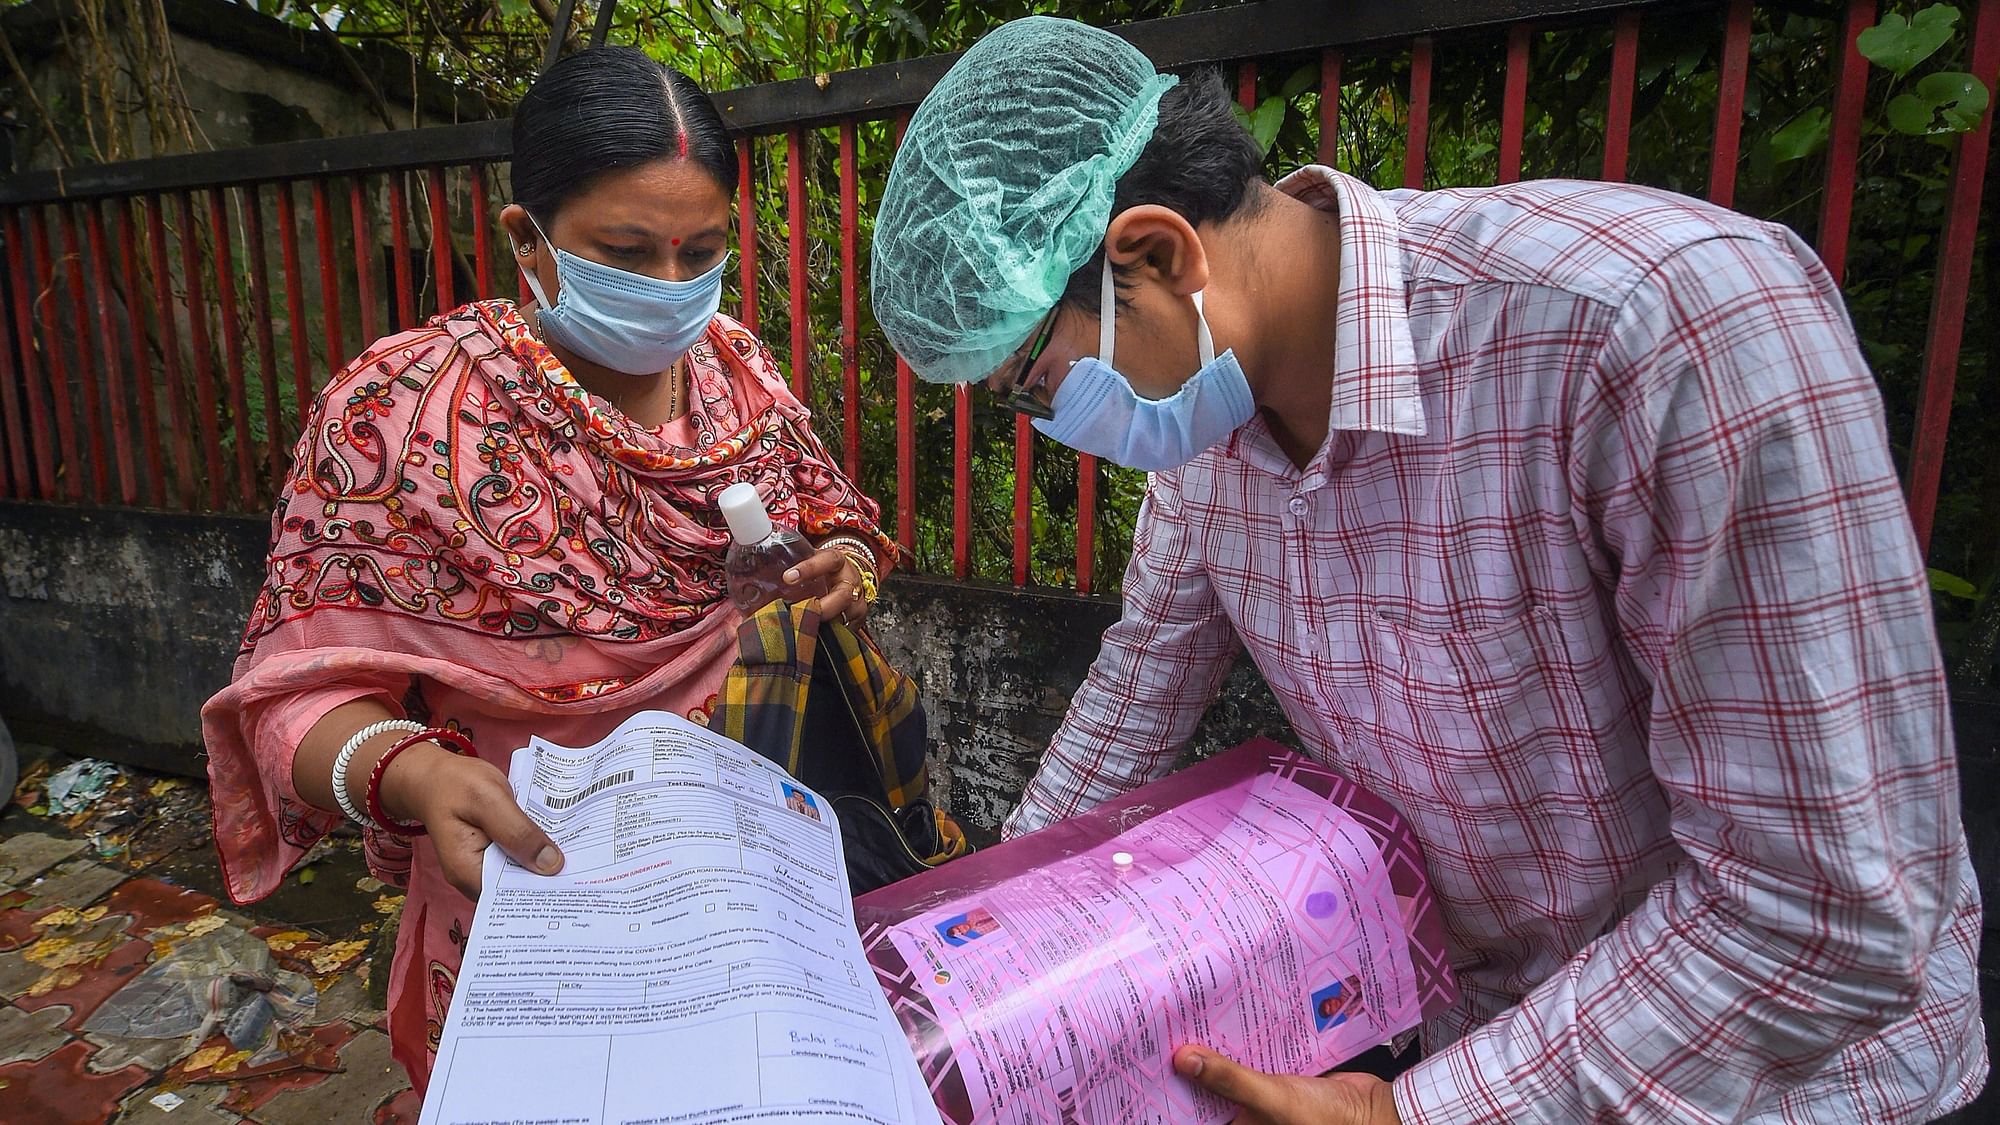 JEE Main Exam 2020: NSUI condemns the imposition of JEE despite the concerns and demand from the students’ community to postpone the examination considering the pandemic. (Image used for representation only)